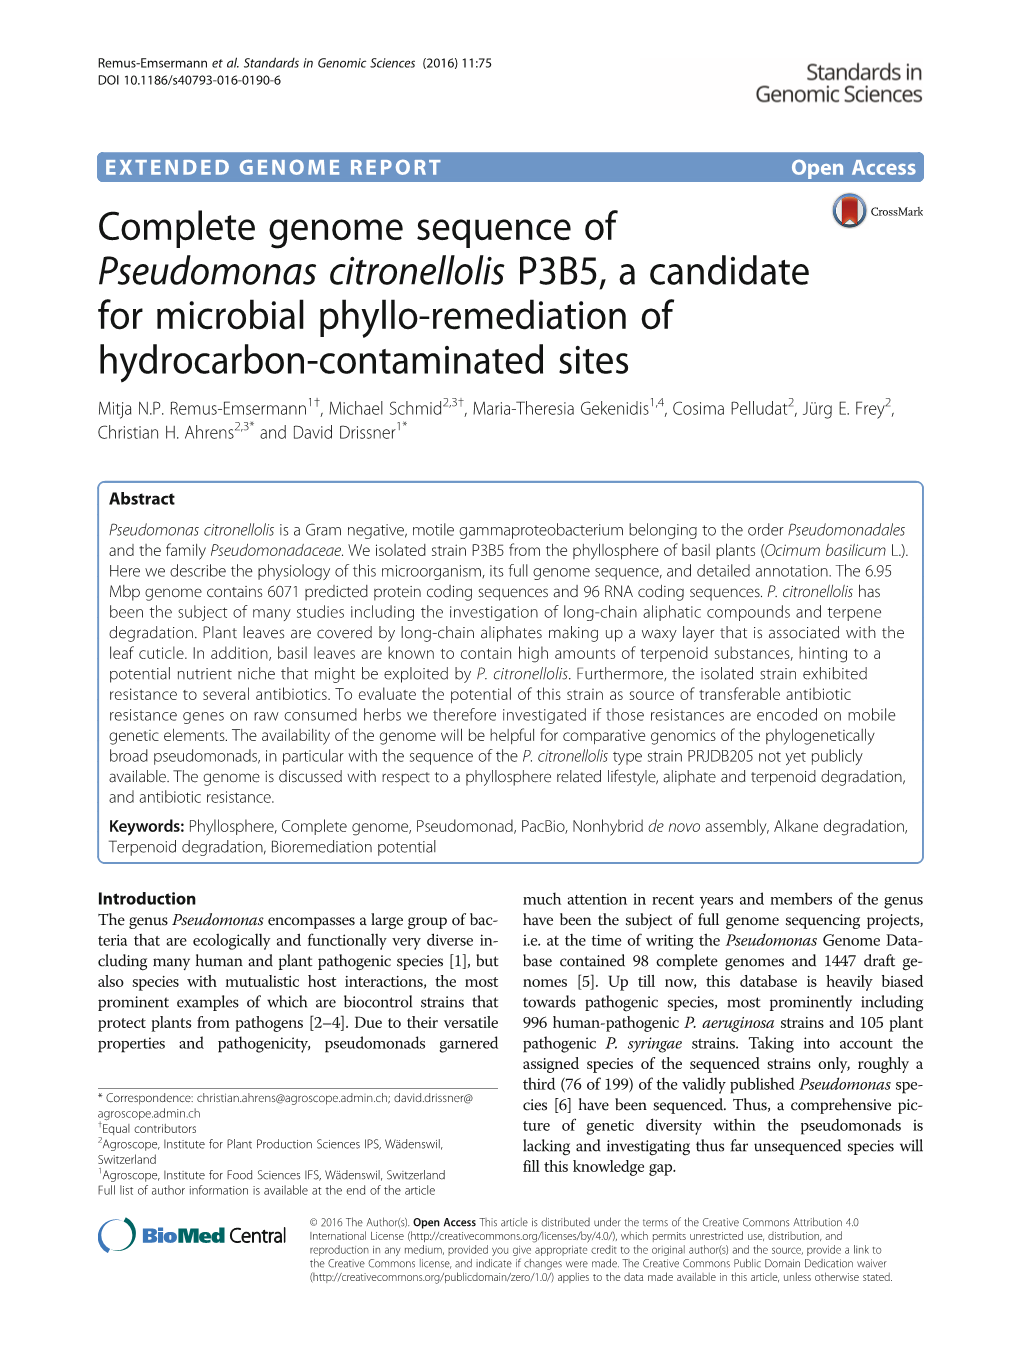 Complete Genome Sequence of Pseudomonas Citronellolis P3B5, a Candidate for Microbial Phyllo-Remediation of Hydrocarbon-Contaminated Sites Mitja N.P